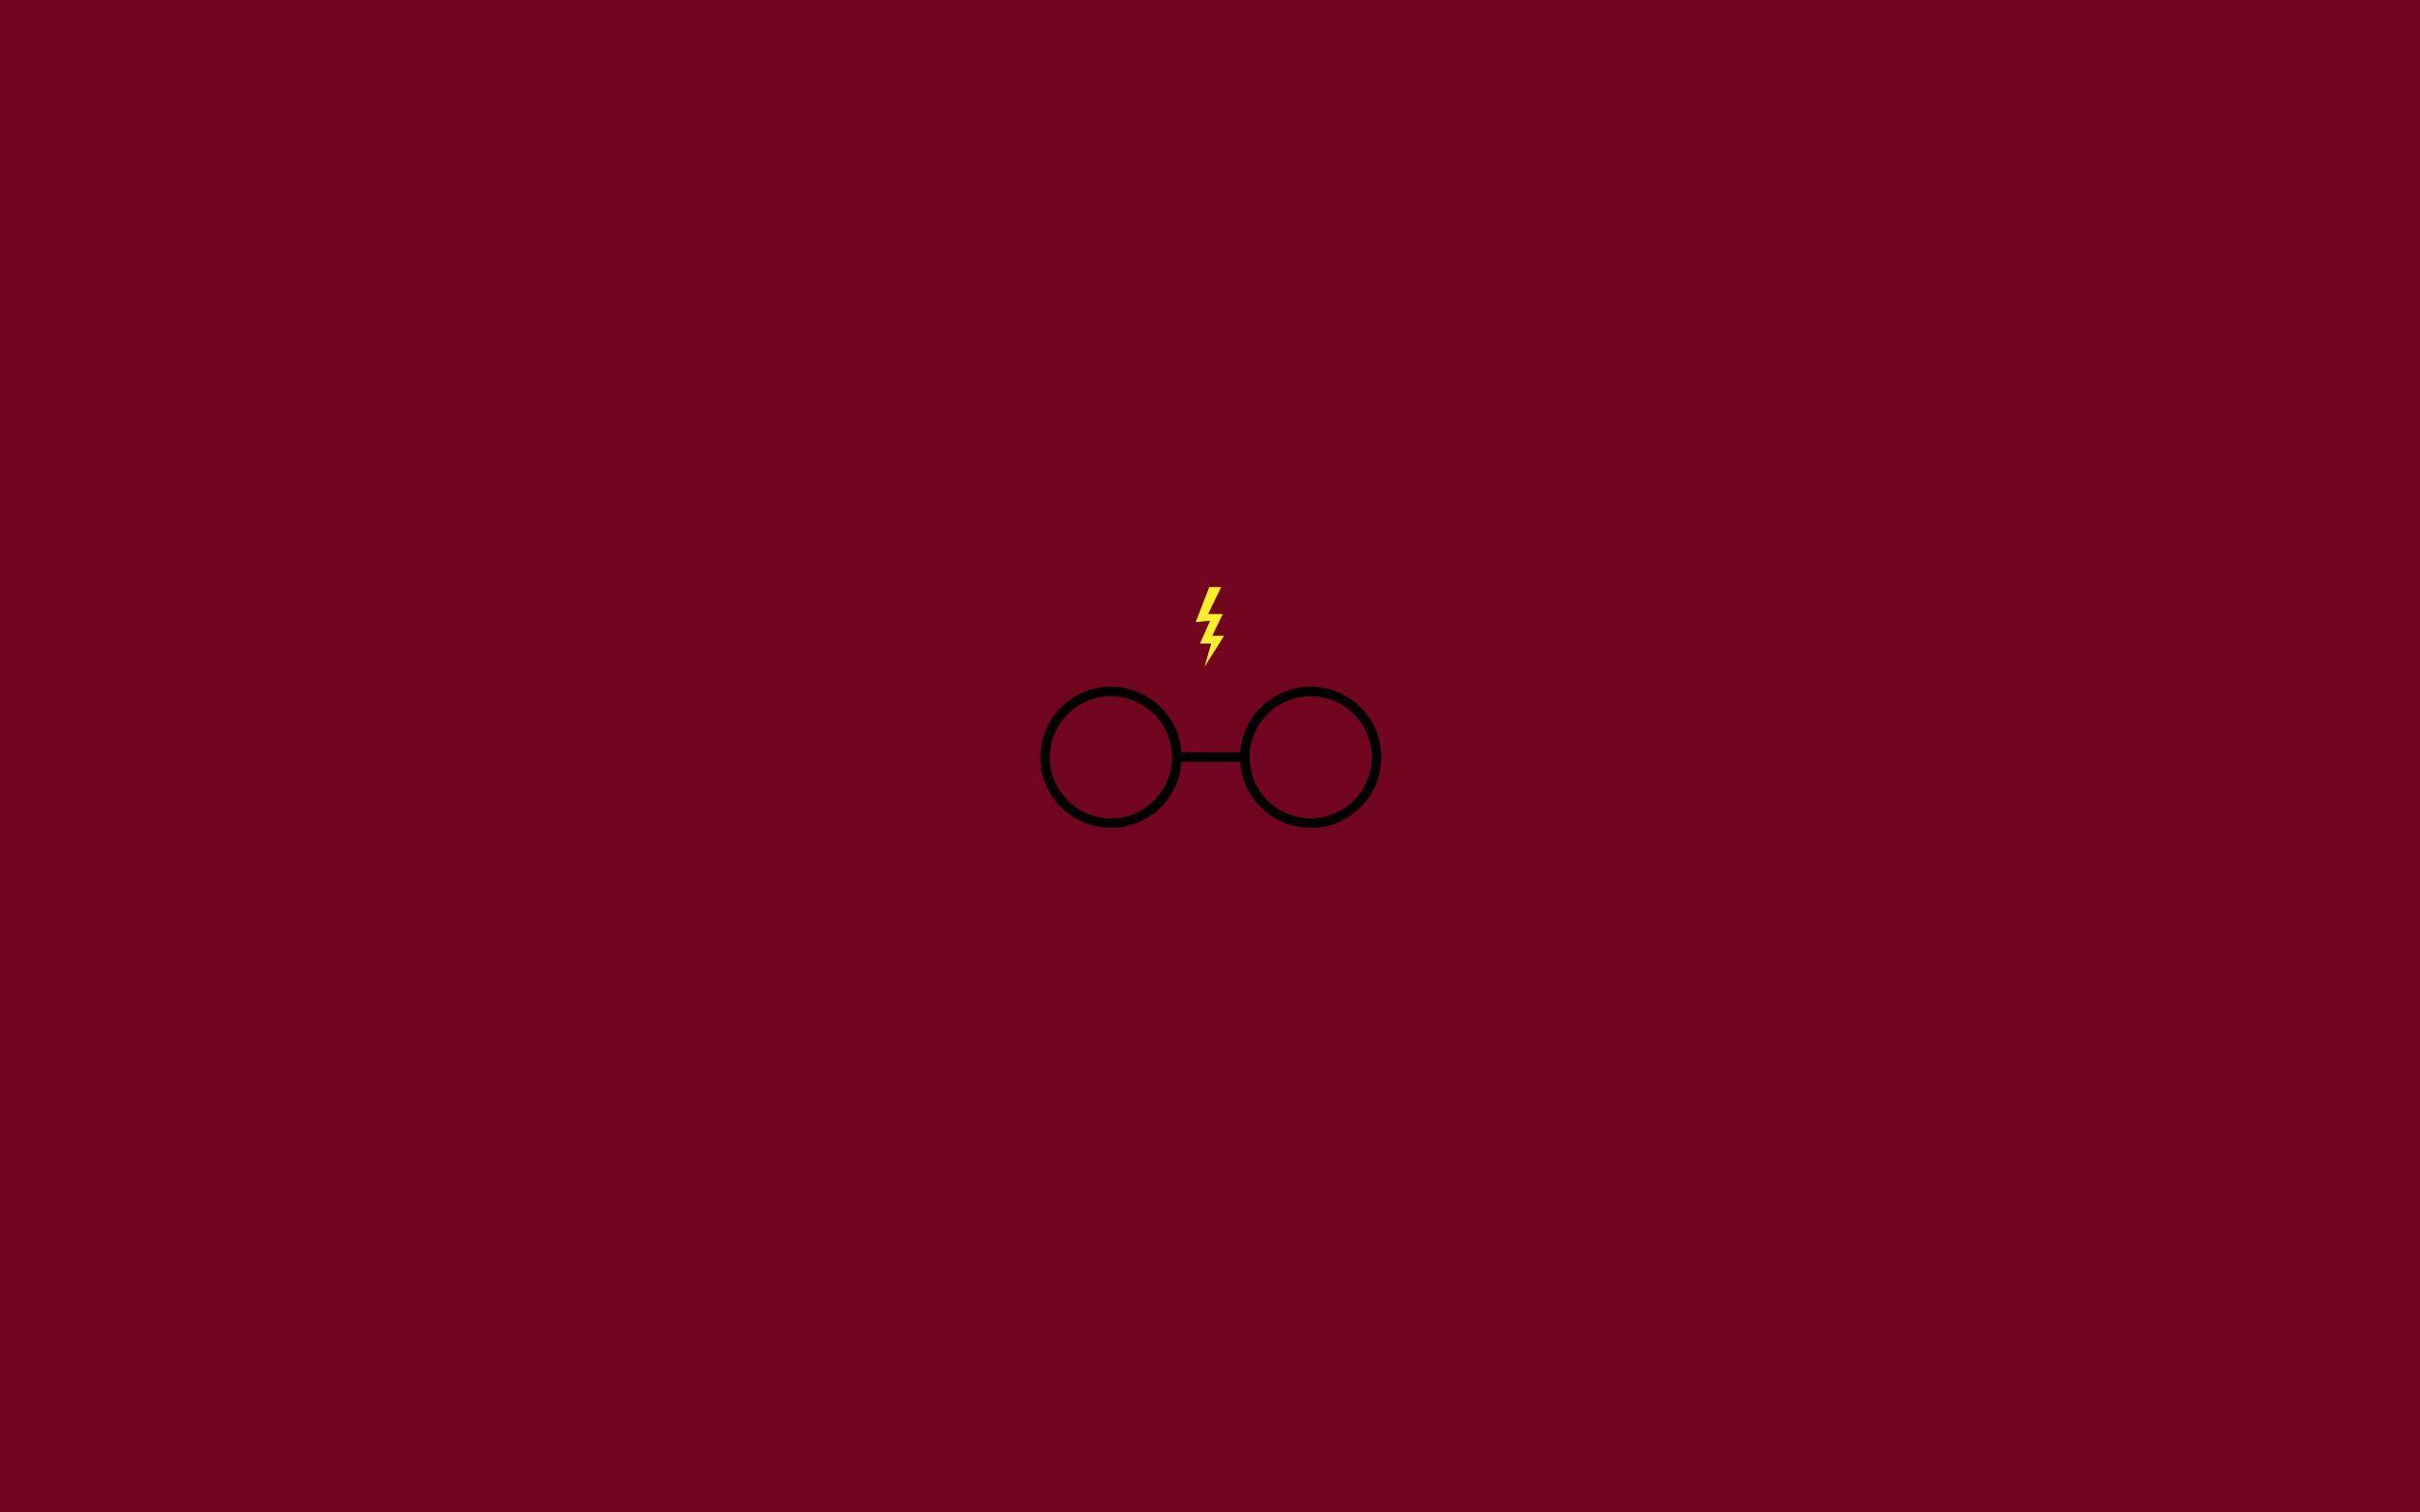 Harry Potter quote wallpapers by An